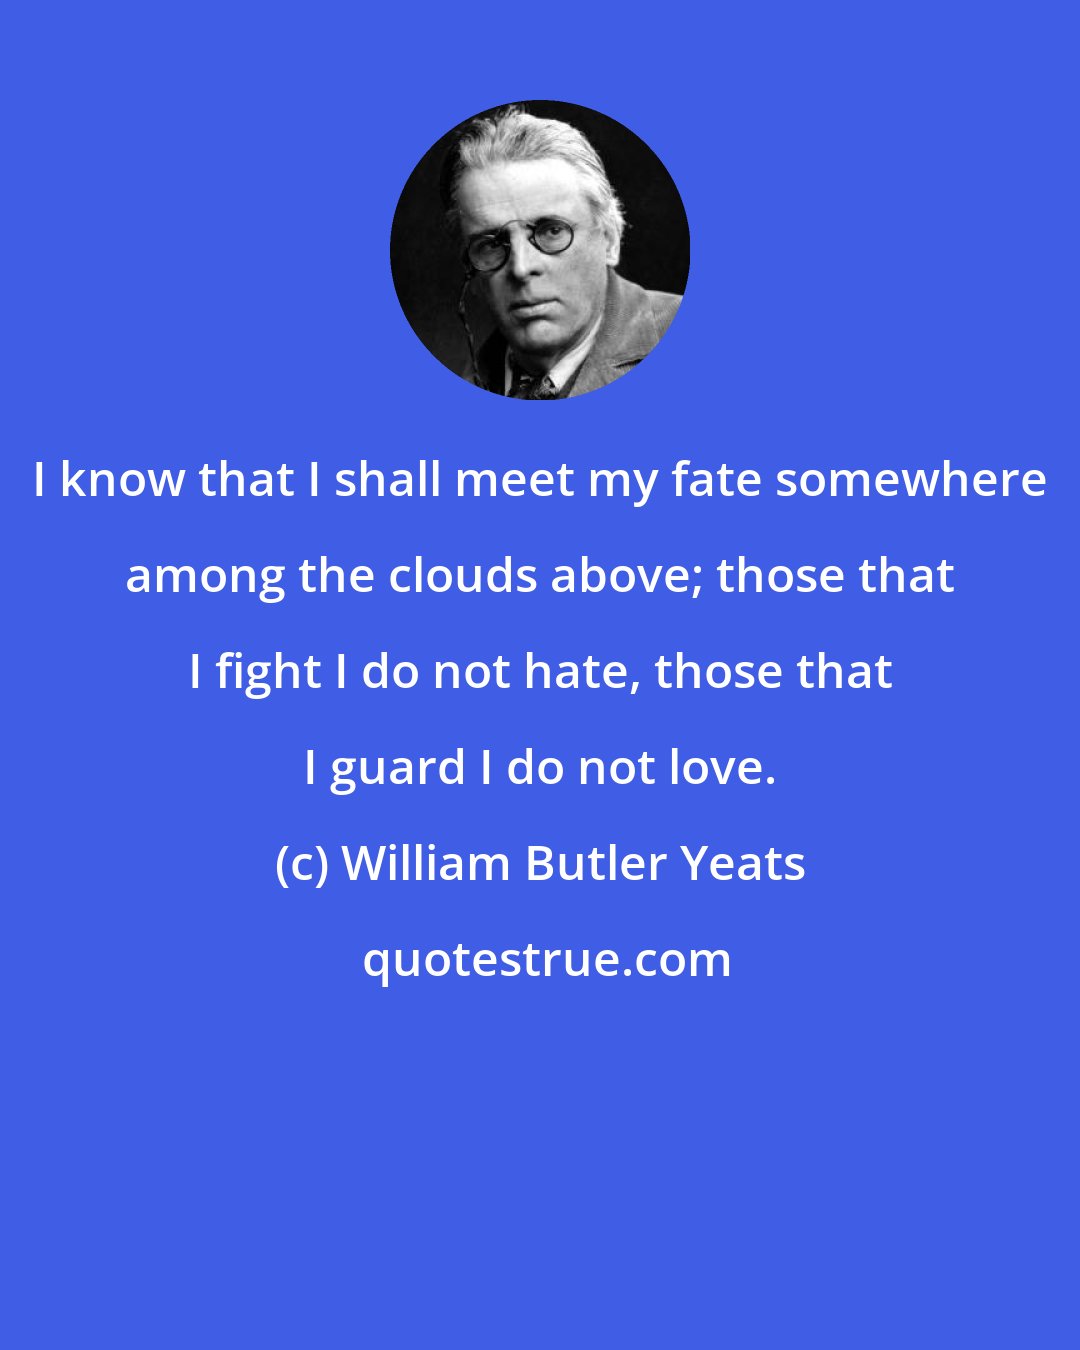 William Butler Yeats: I know that I shall meet my fate somewhere among the clouds above; those that I fight I do not hate, those that I guard I do not love.